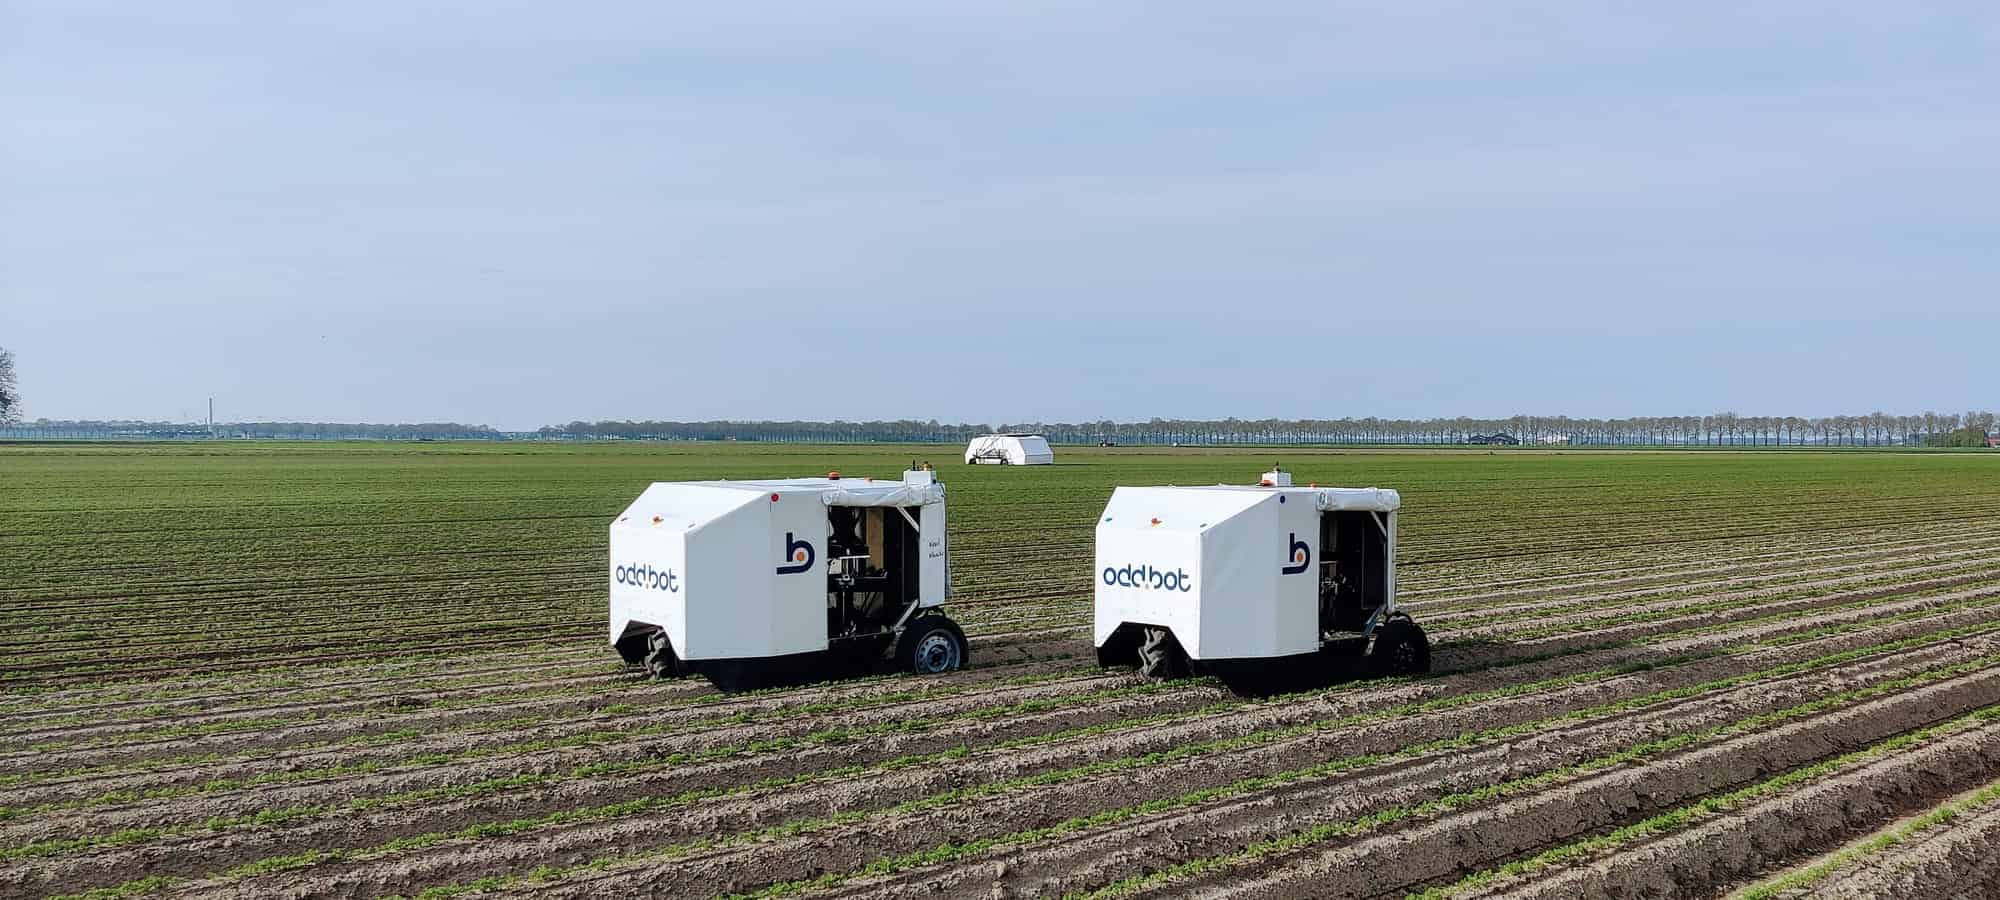 Robotic revolution in agriculture: spraying poison will soon be over, thanks in part to 5G